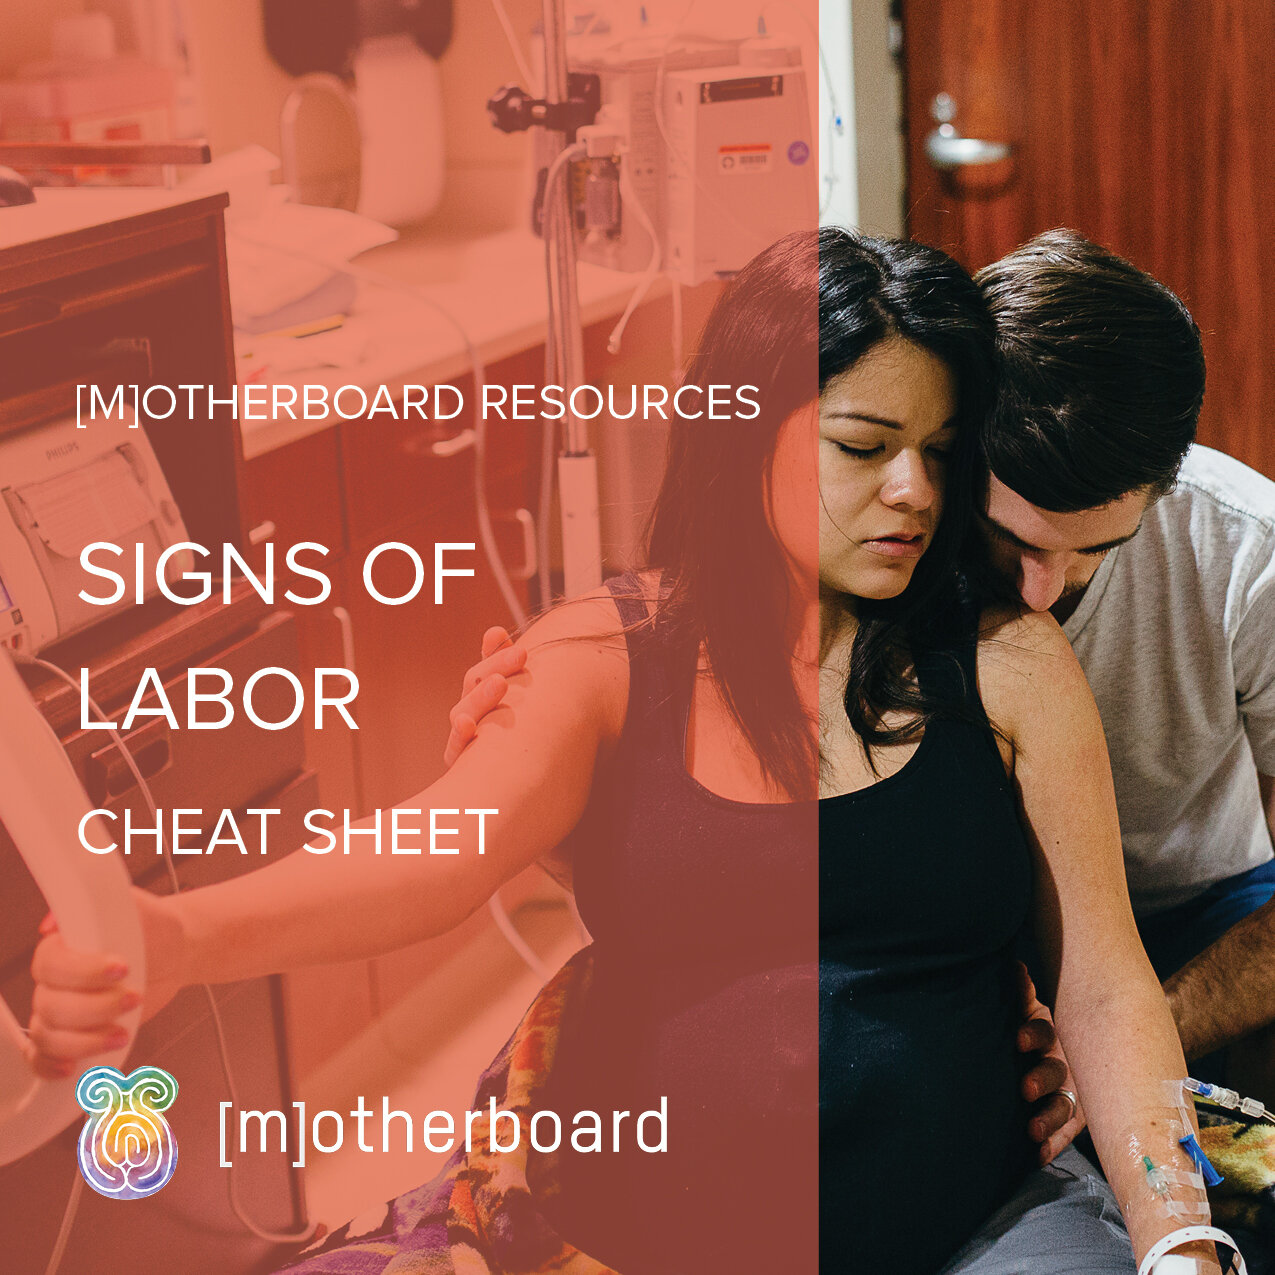 SIGNS OF LABOR CHEAT SHEET